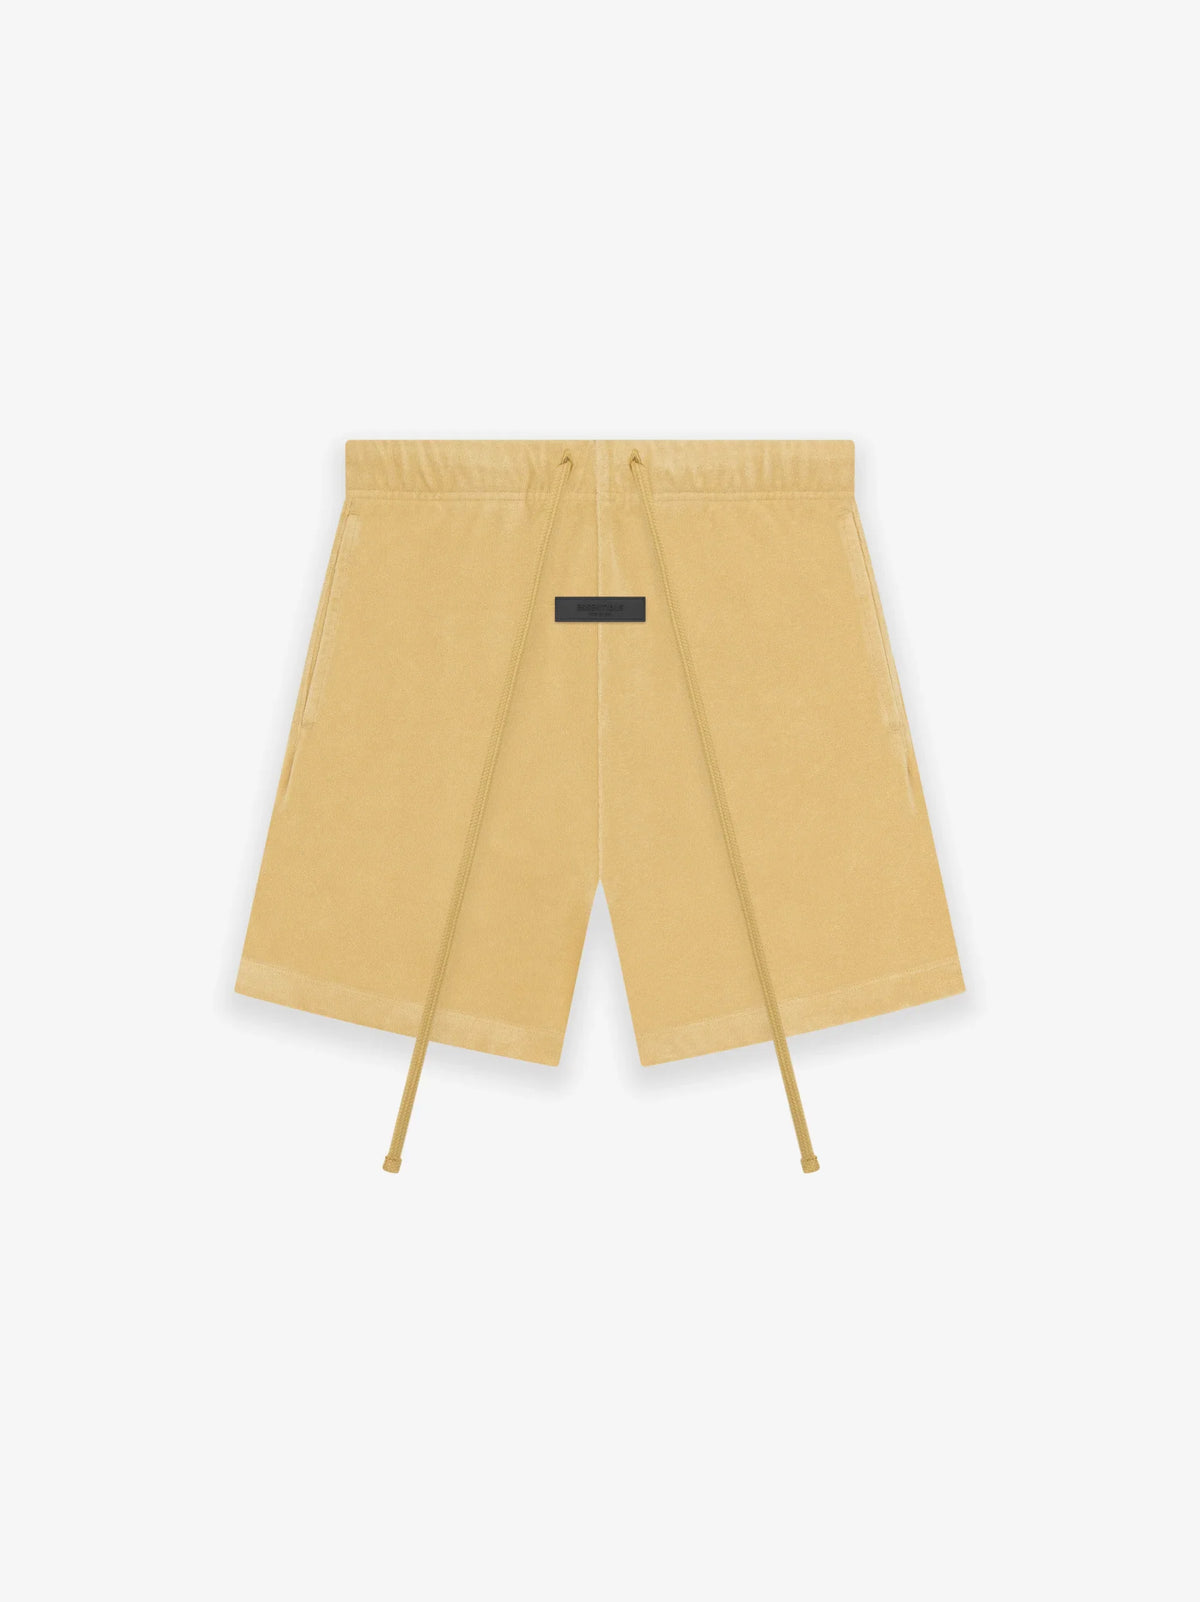 ESSENTIALS TERRY SHORTS LIGHT TUSCA - Gravity NYC